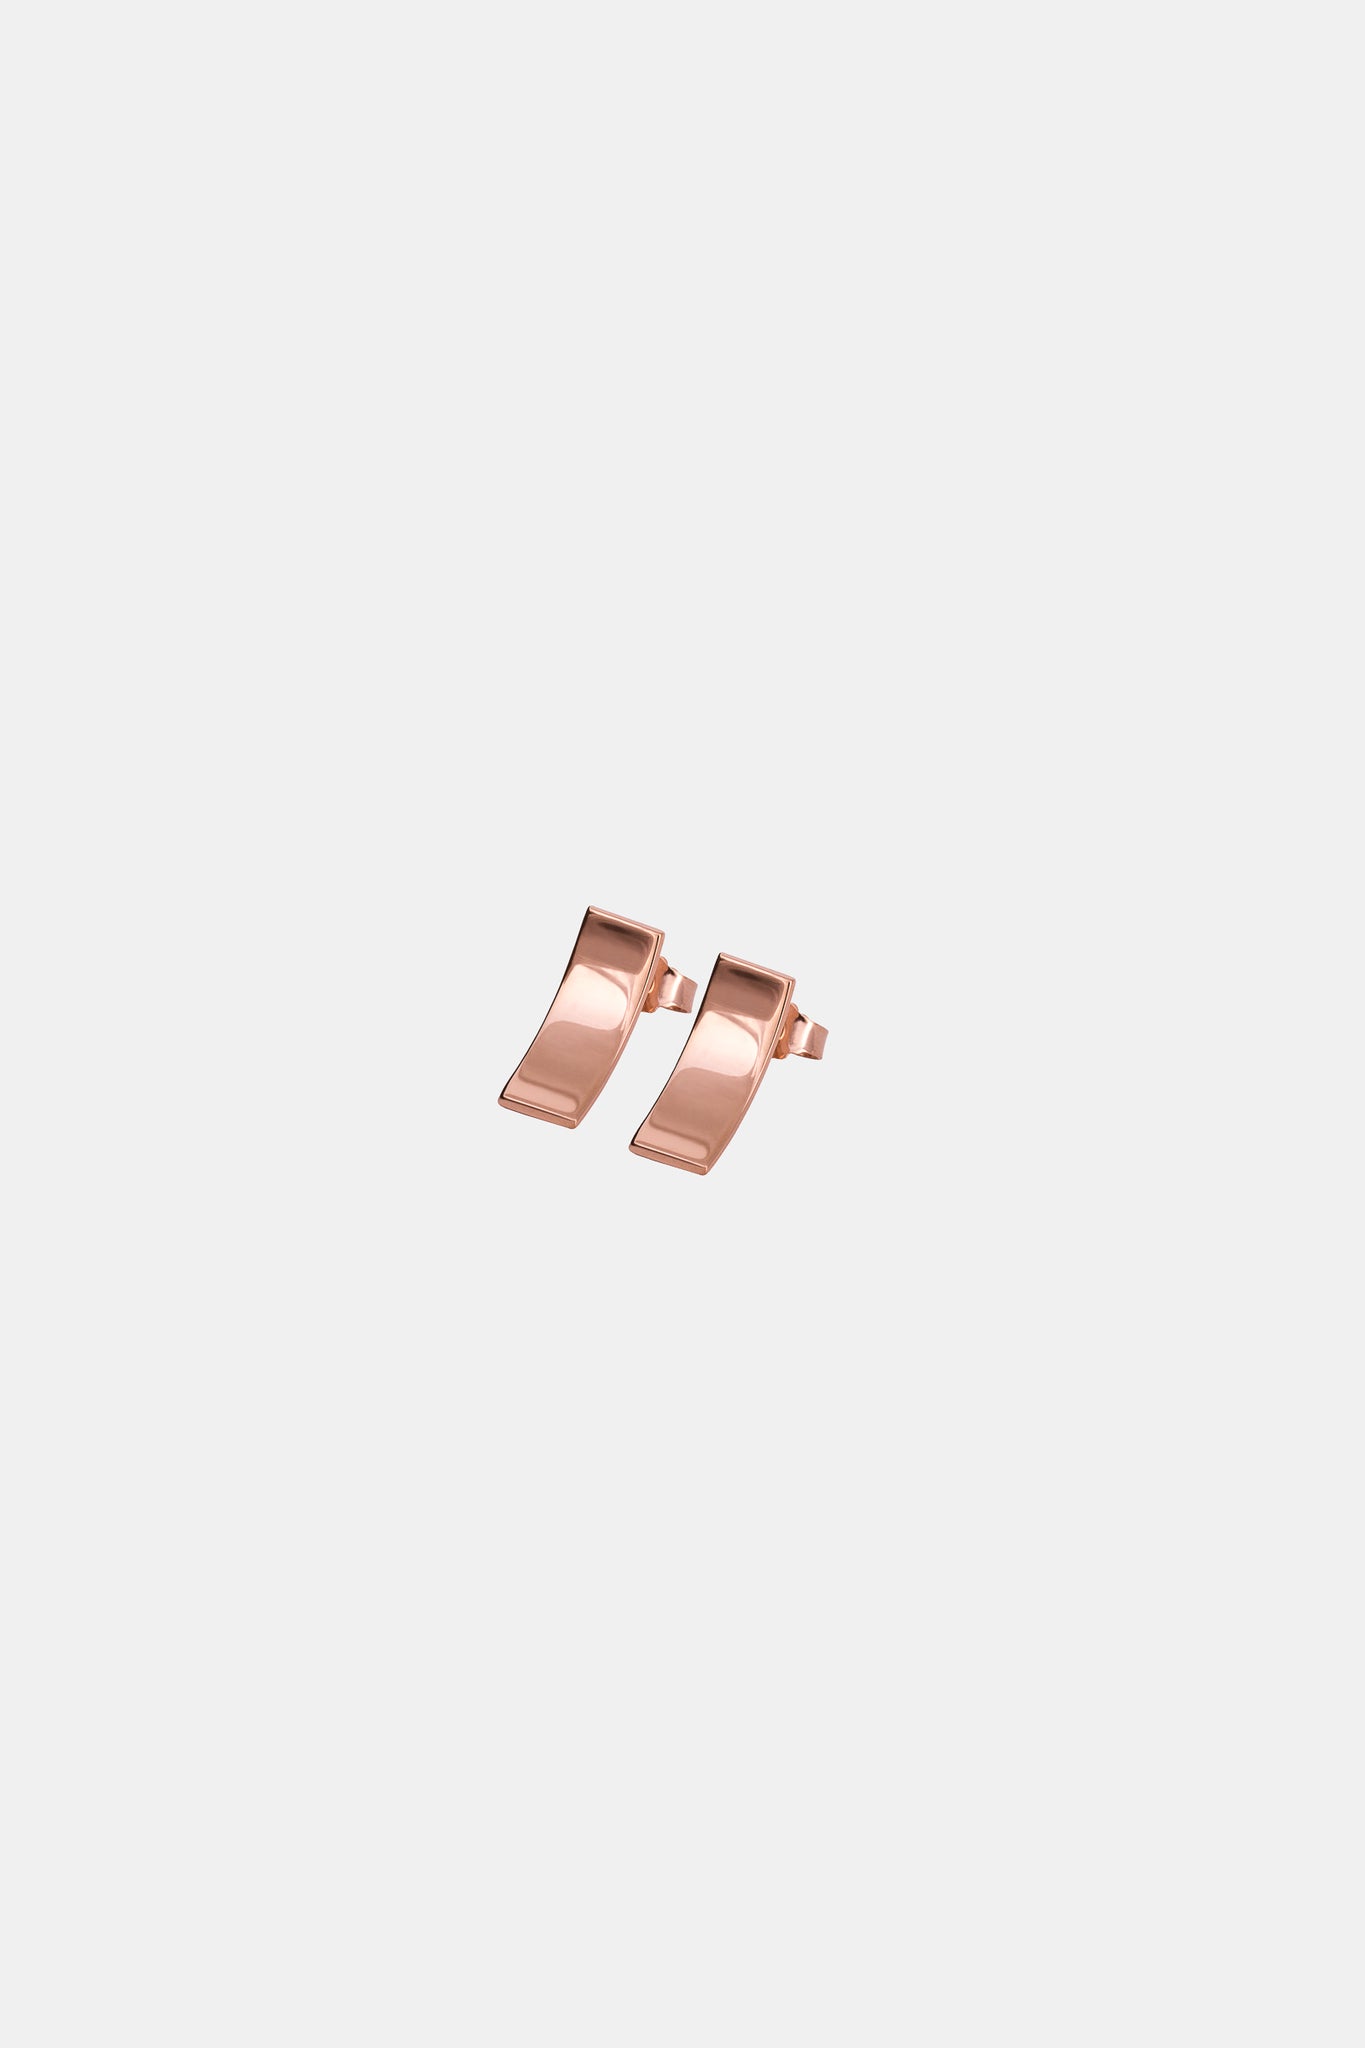 Rose gold plated minimalistic earrings made in Germany